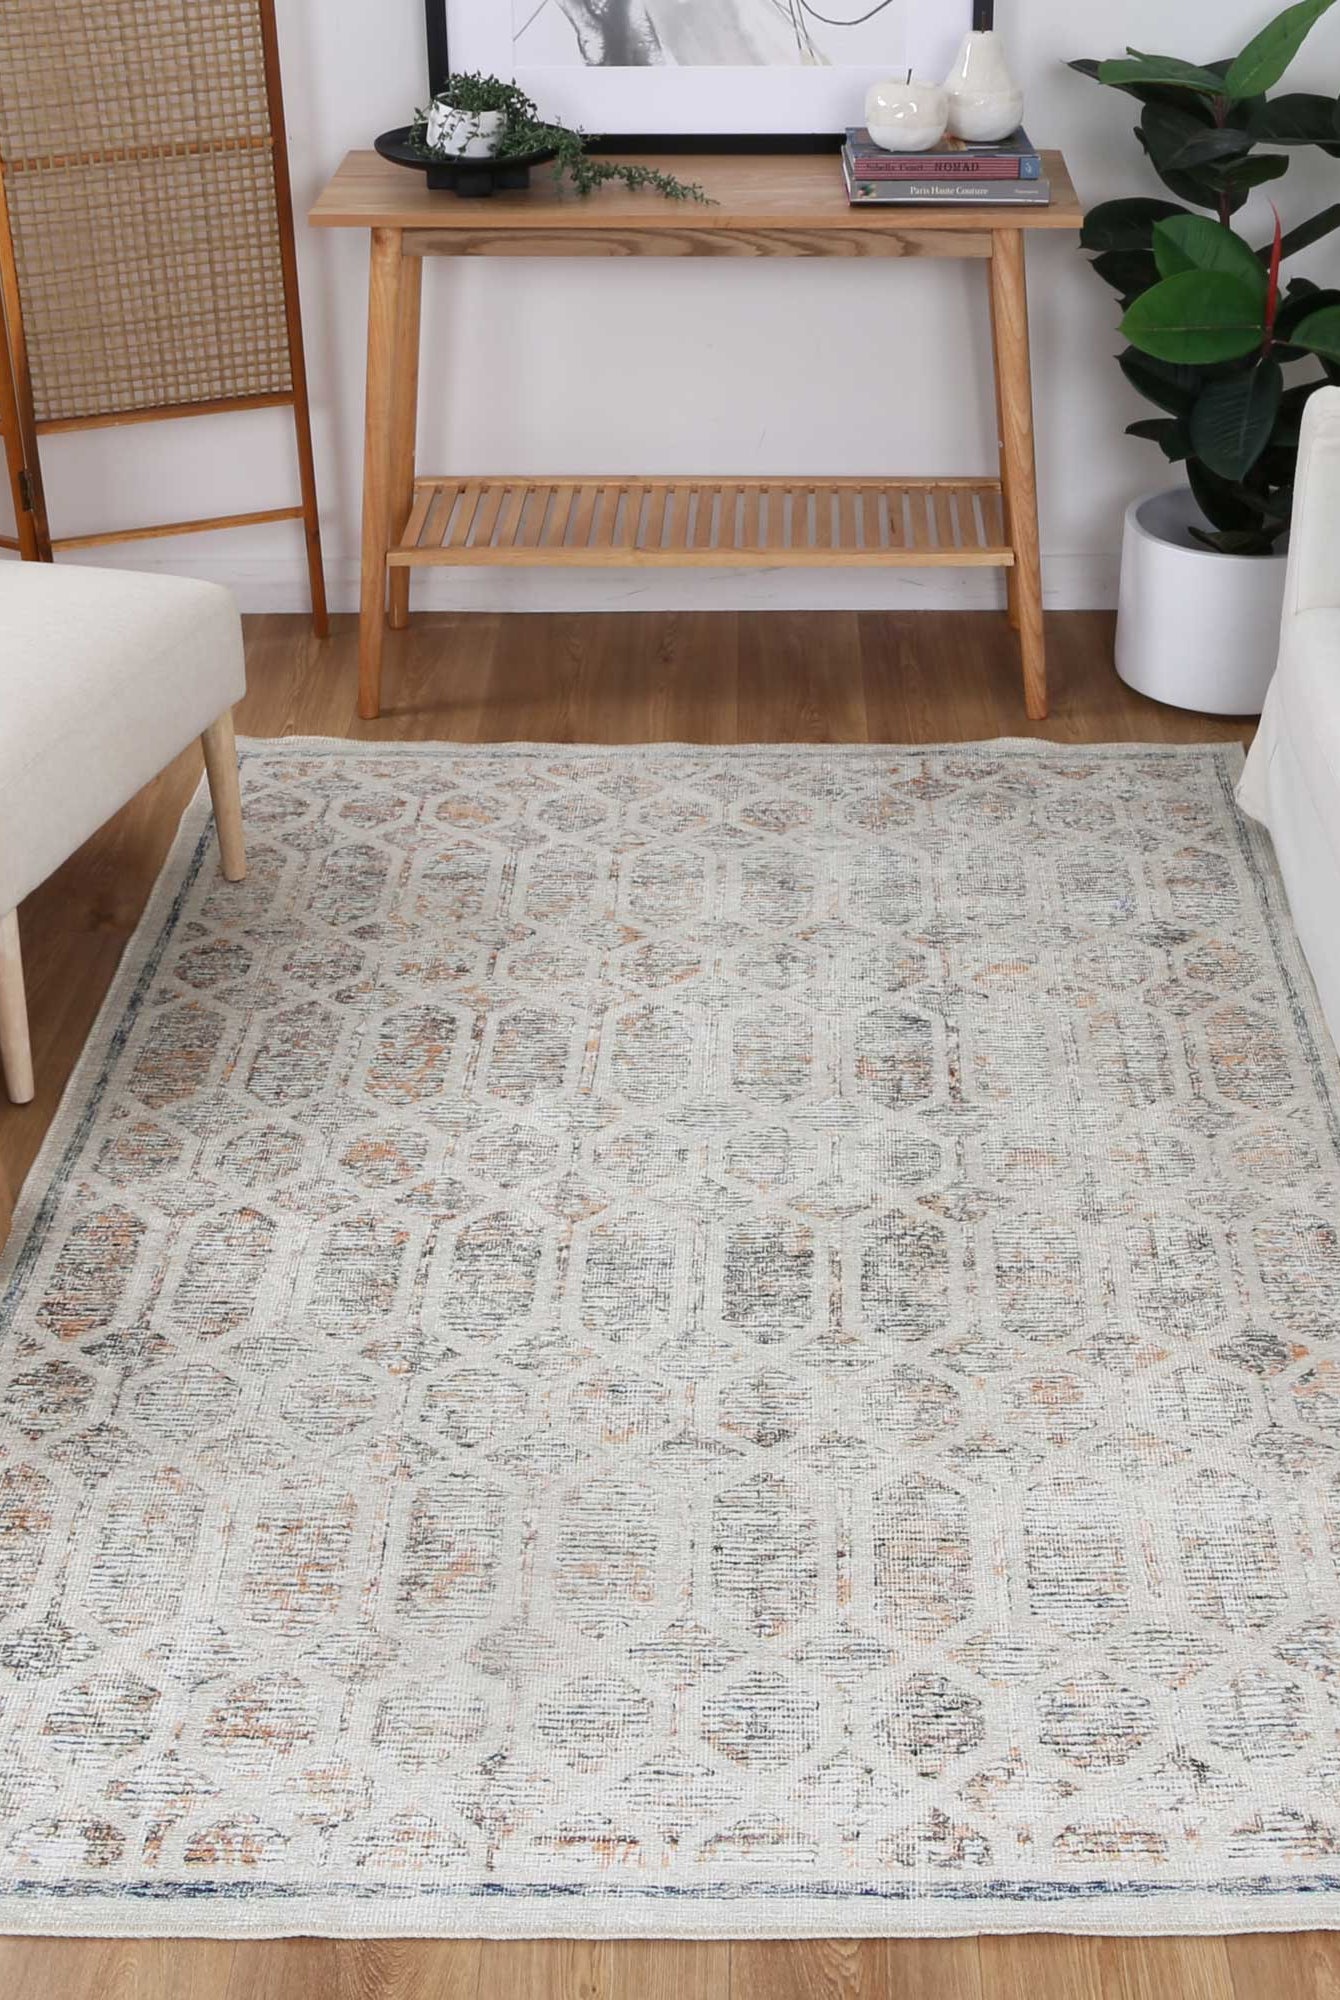 Chantilly Lace Multi Rug in living room